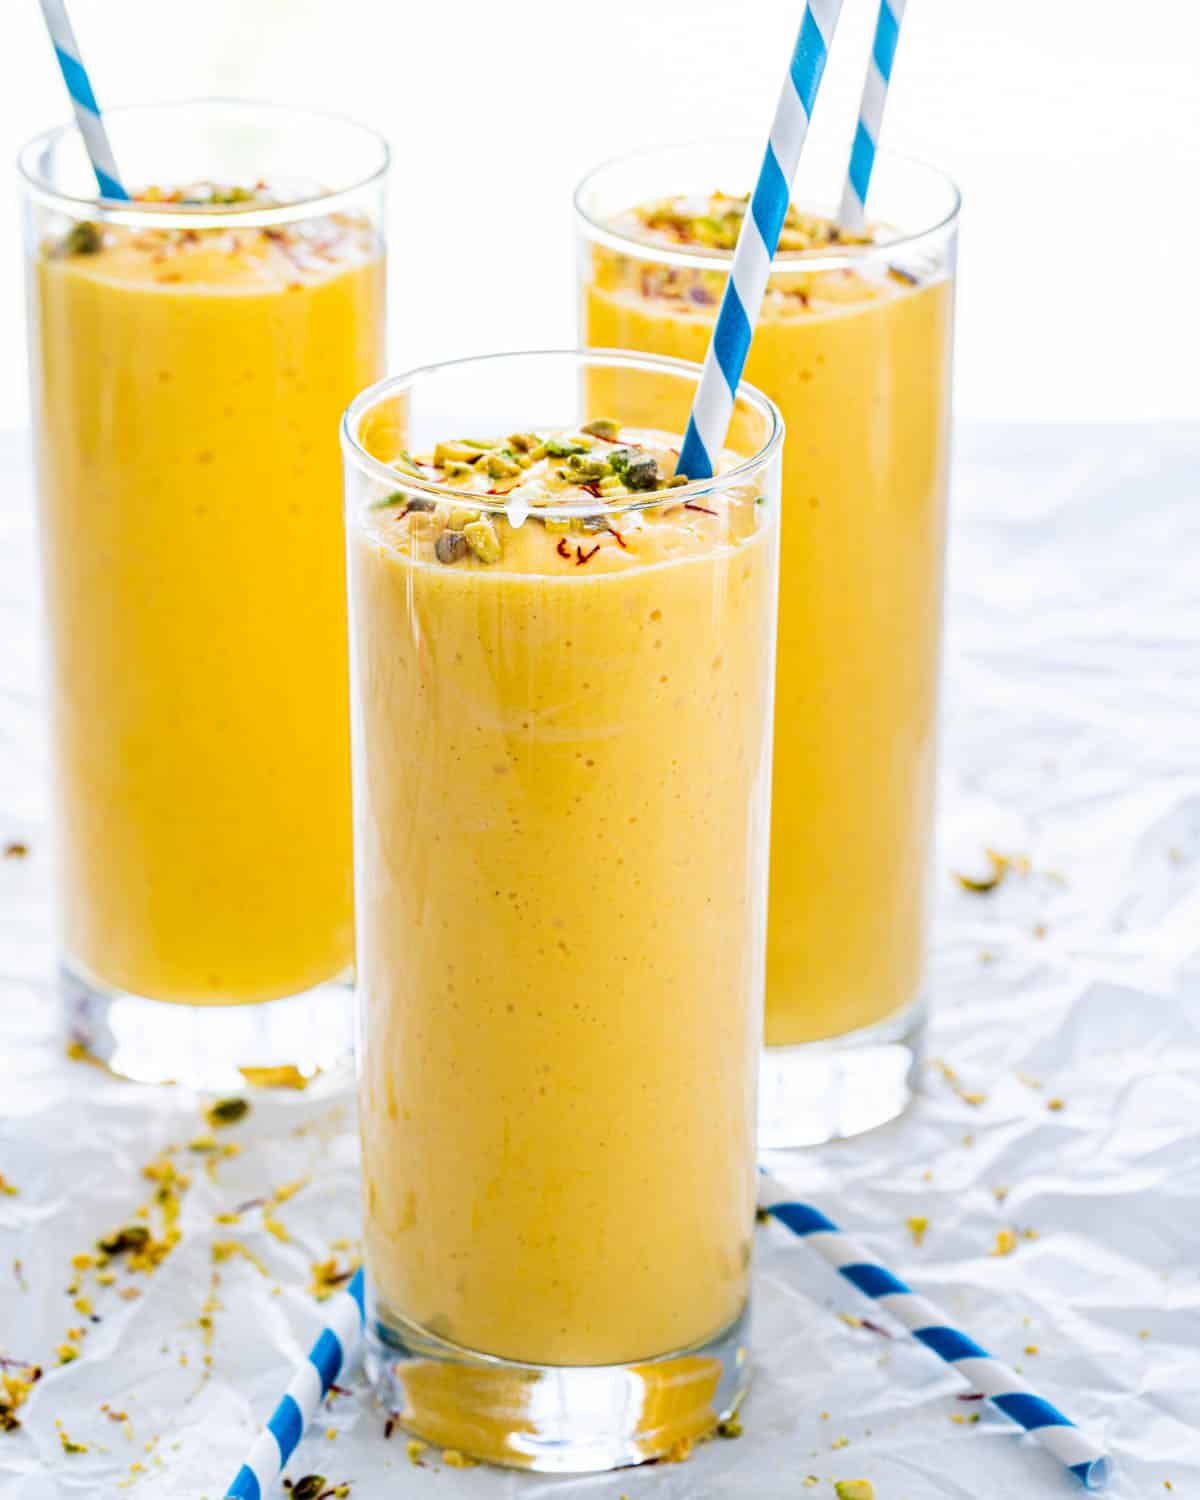 3 glasses of mango lassi garnished with pistachios